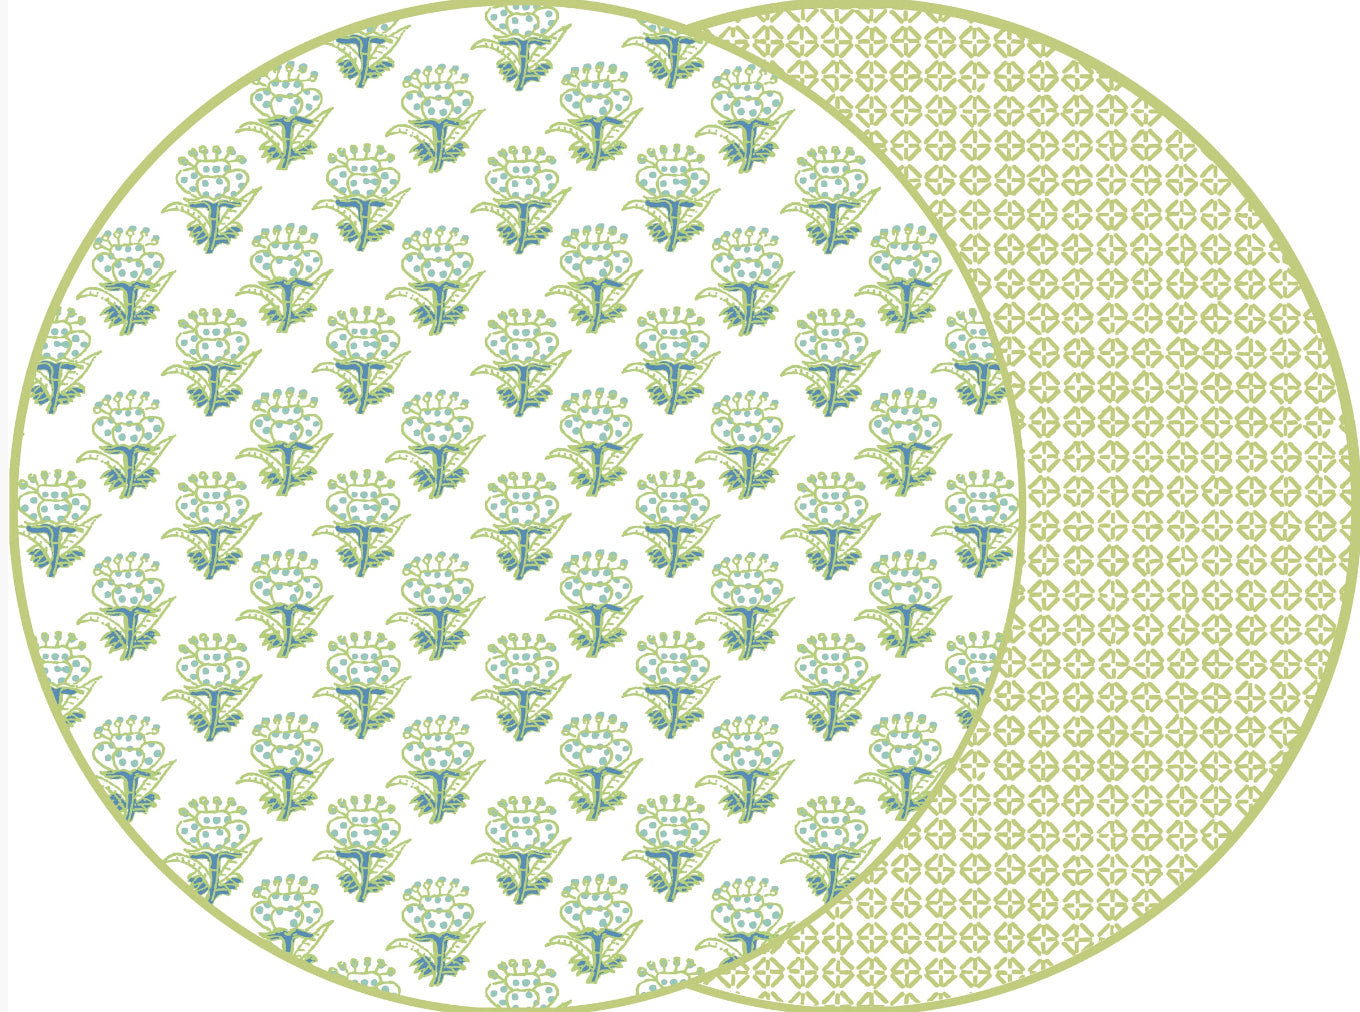 ROUND TWO SIDED PETITE FLEUR  AND JAIPUR PLACEMAT ~BLUE/GREEN